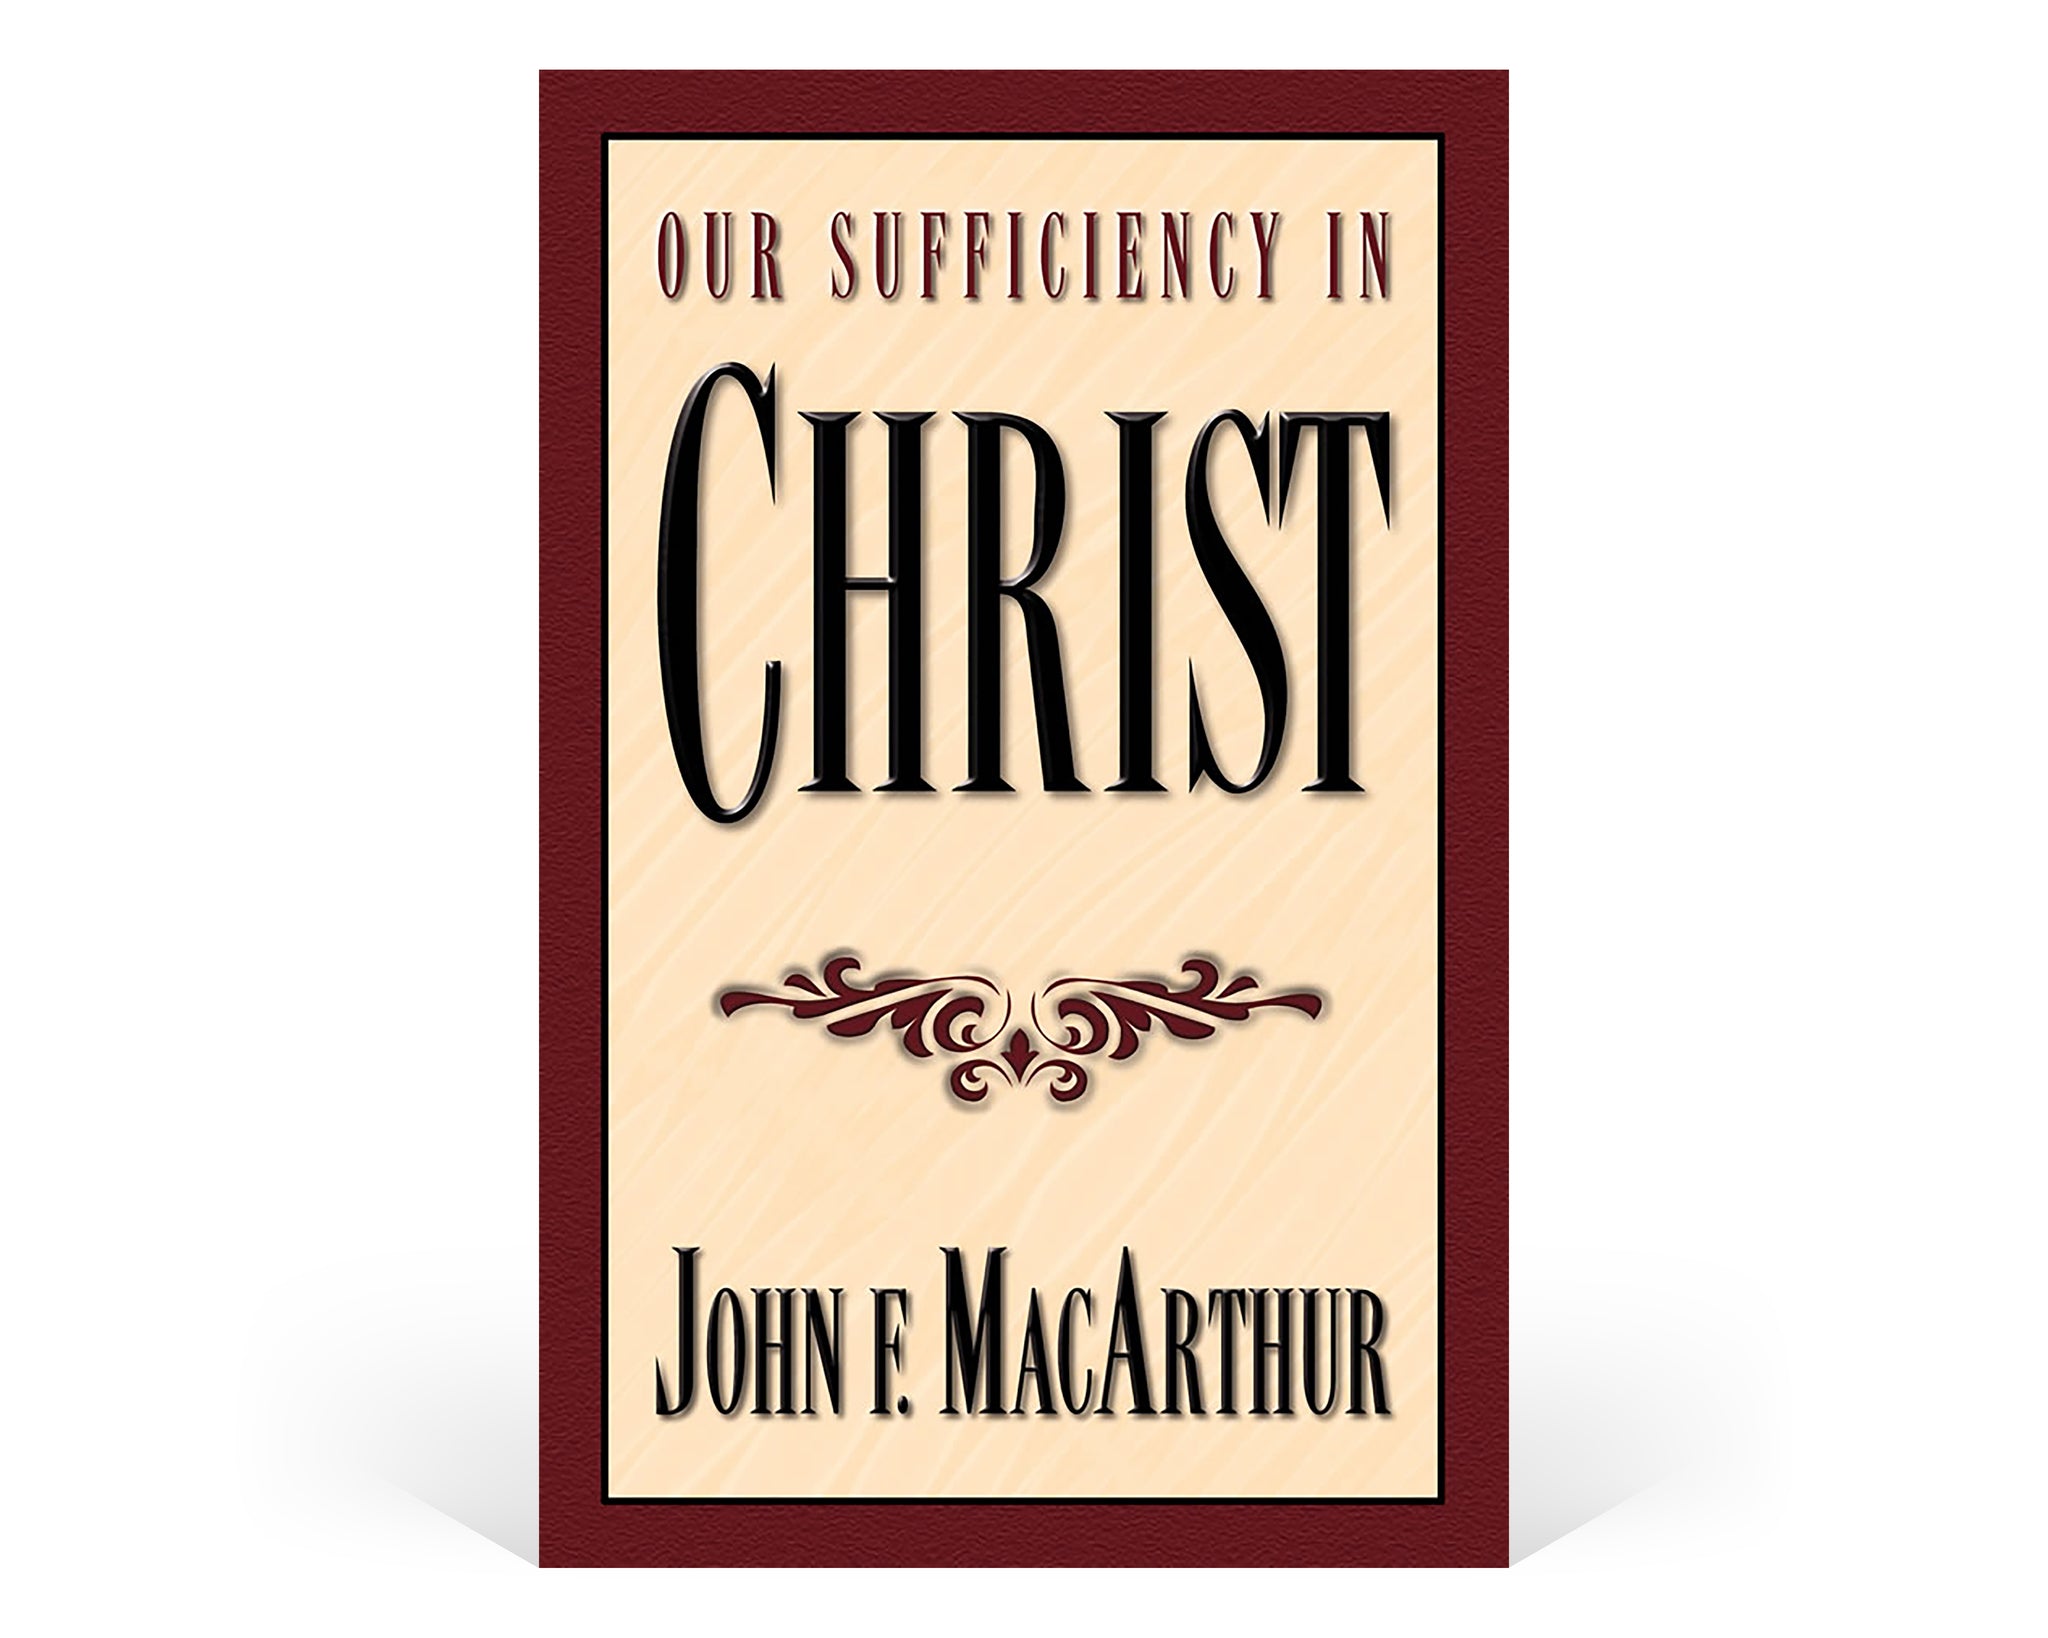 Our Sufficiency in Christ